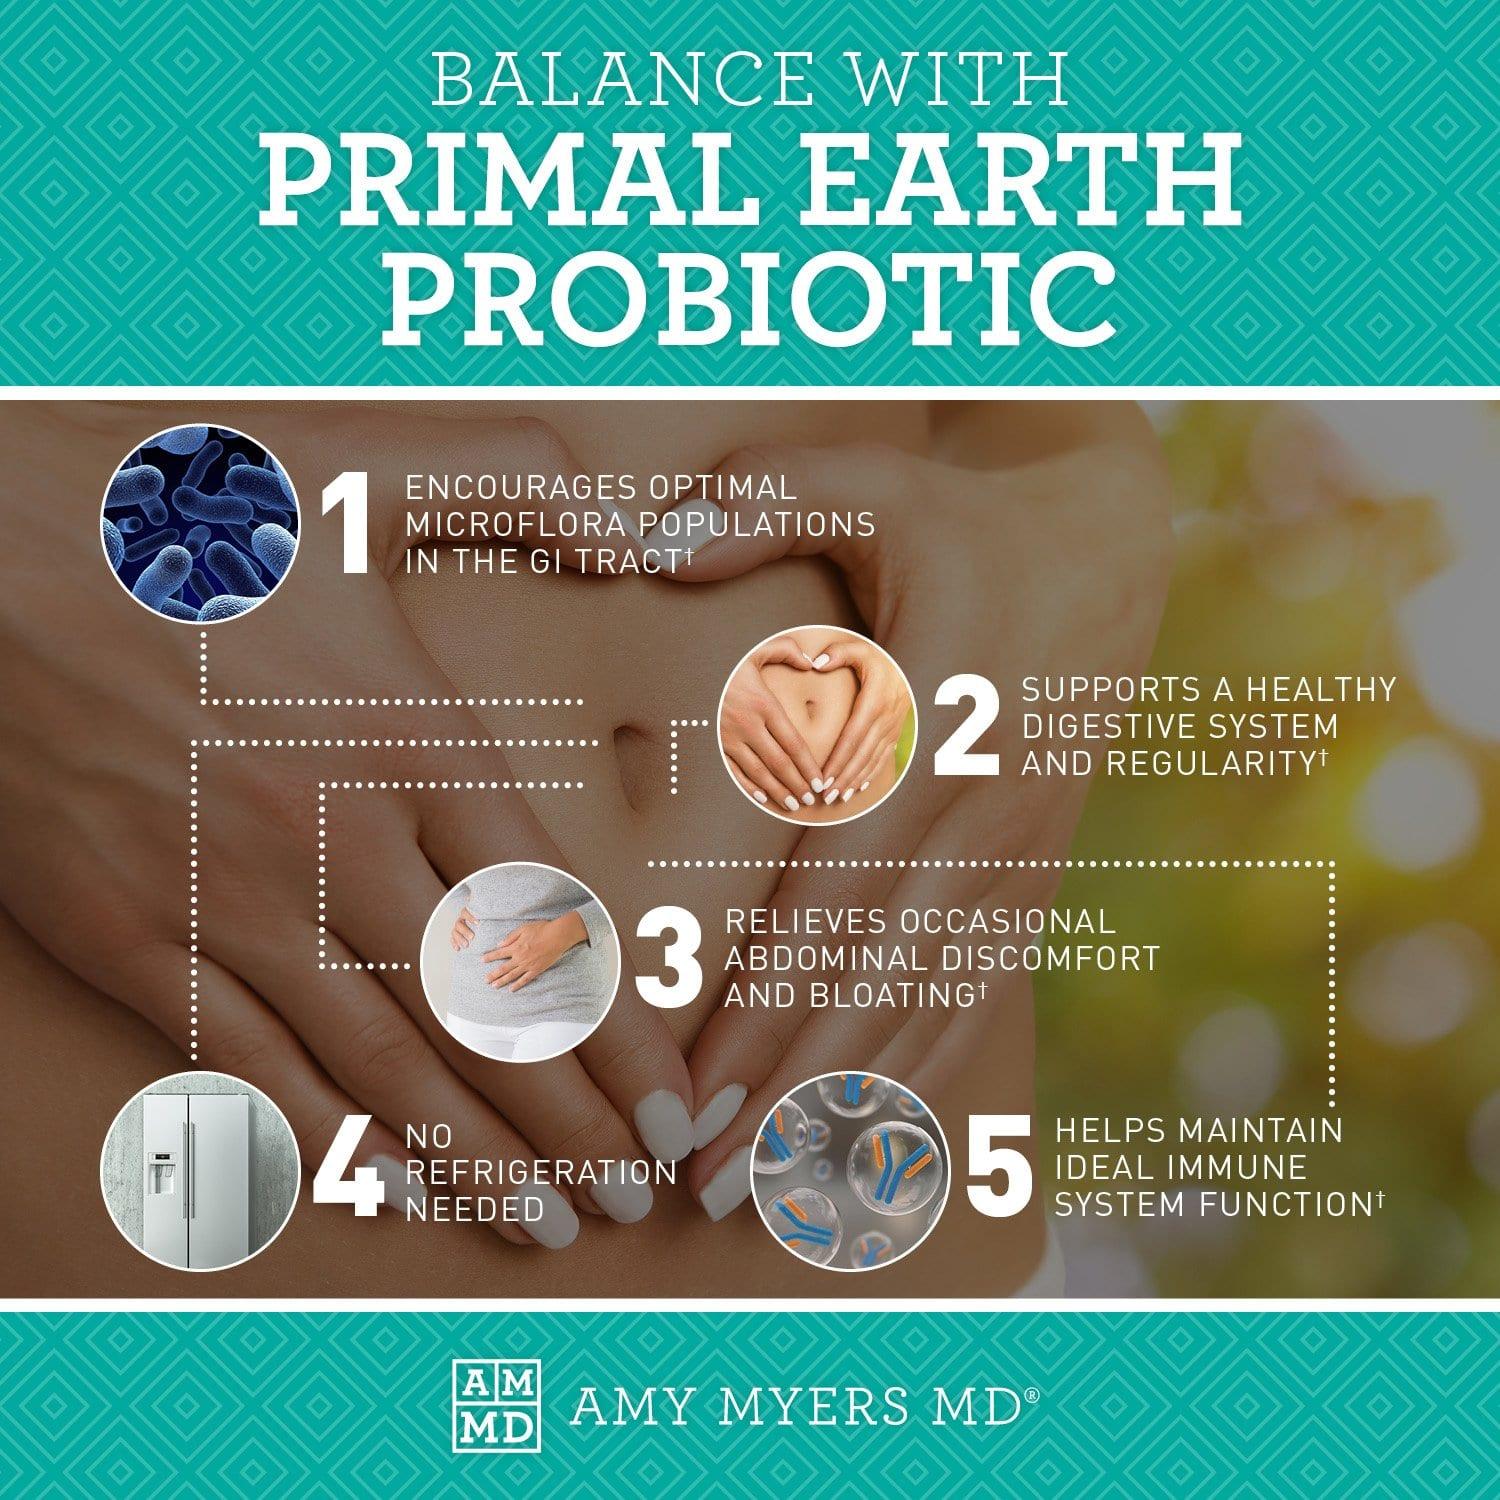 5 features of our Primal Earth™ Probiotic to help you maintain balance  - Infographic - Amy Myers MD®